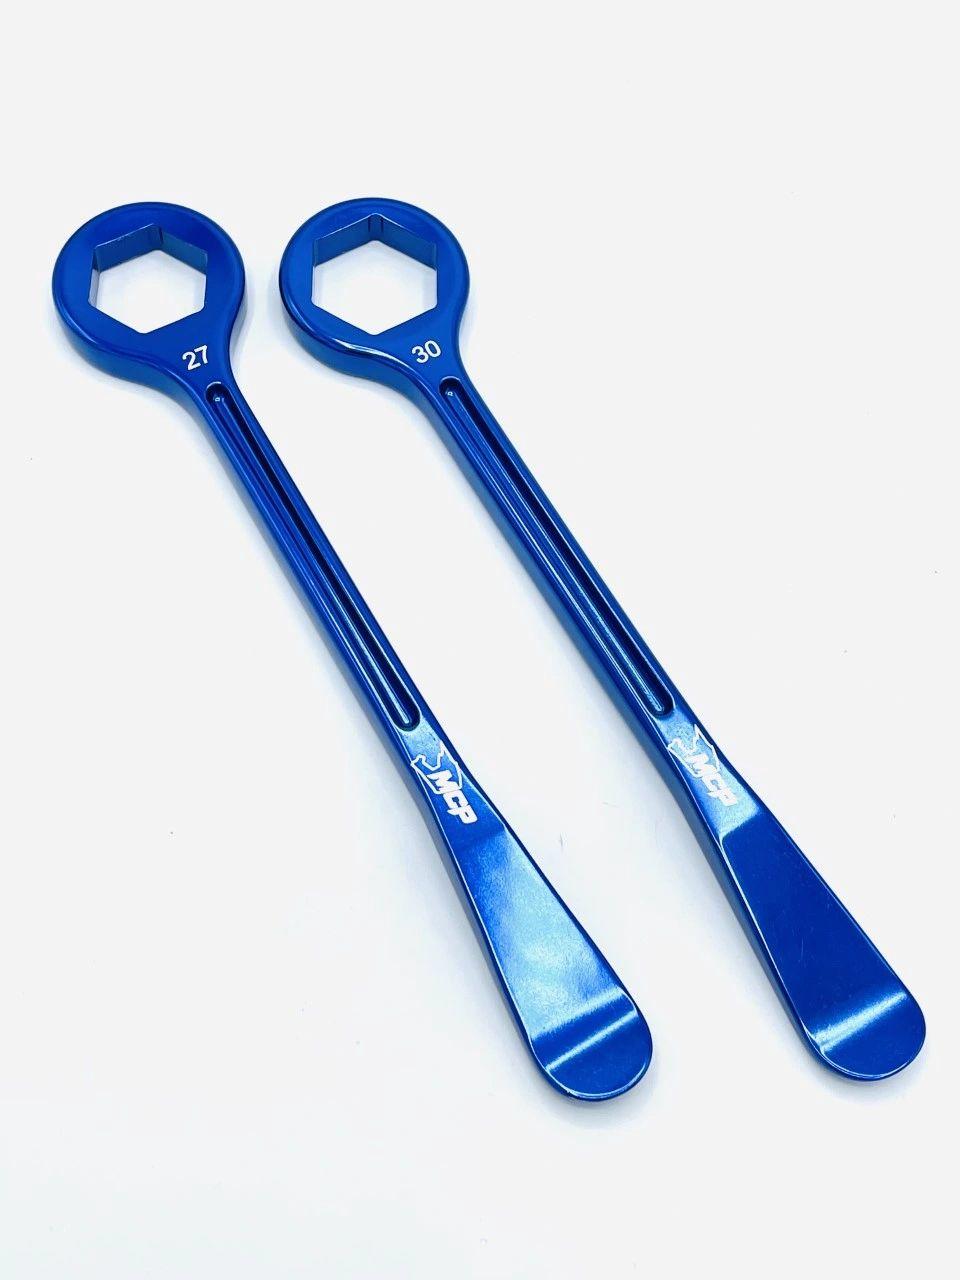 Tire Spoon/Axle Wrench Set - Sherco